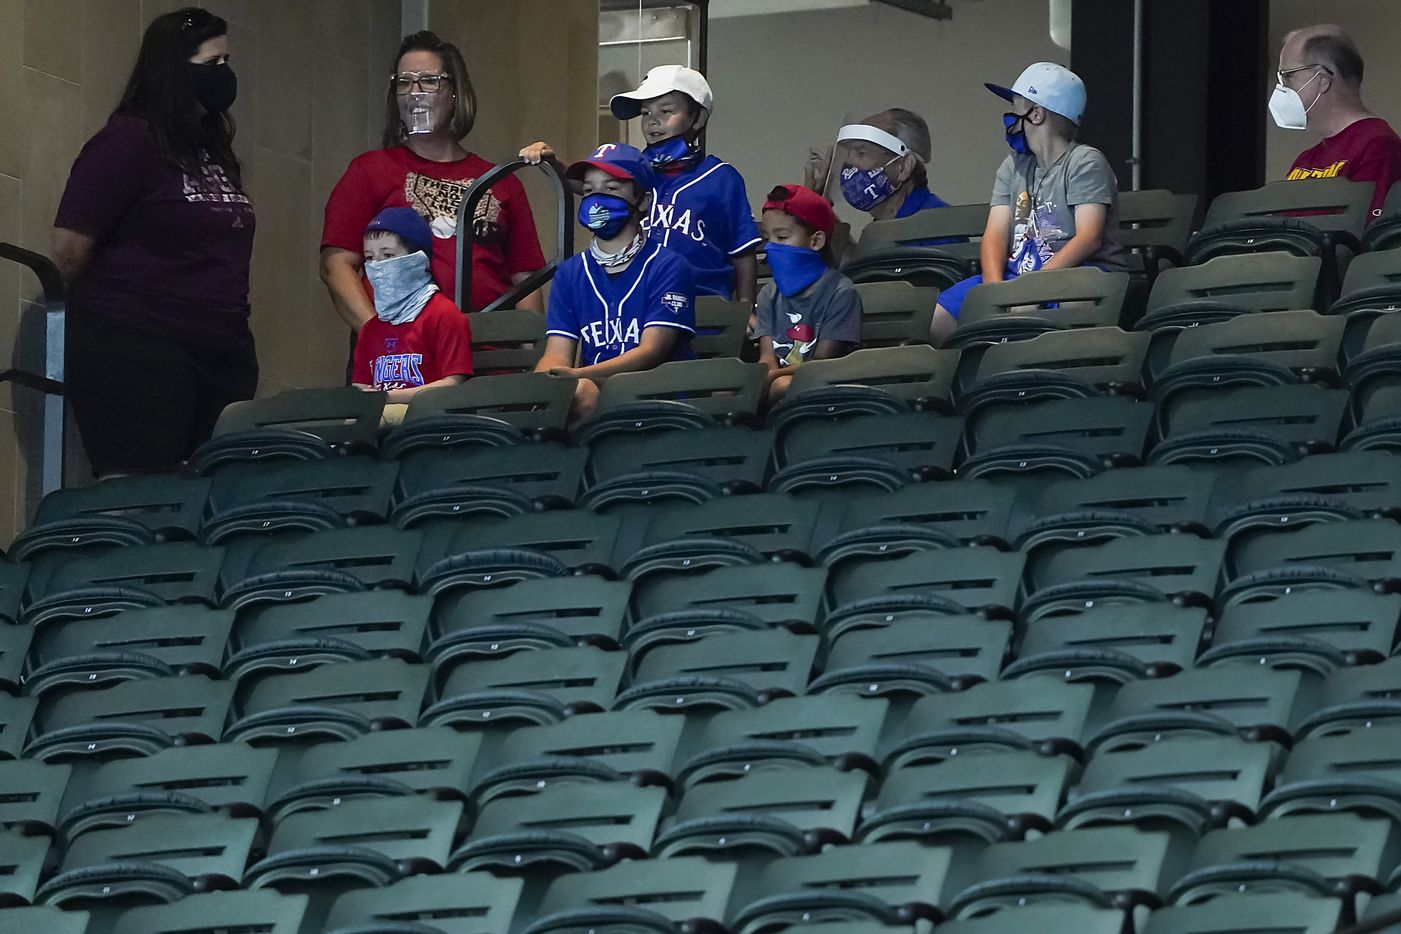 A stadium tour group pauses to watch a game between players at the Texas Rangers alternate...